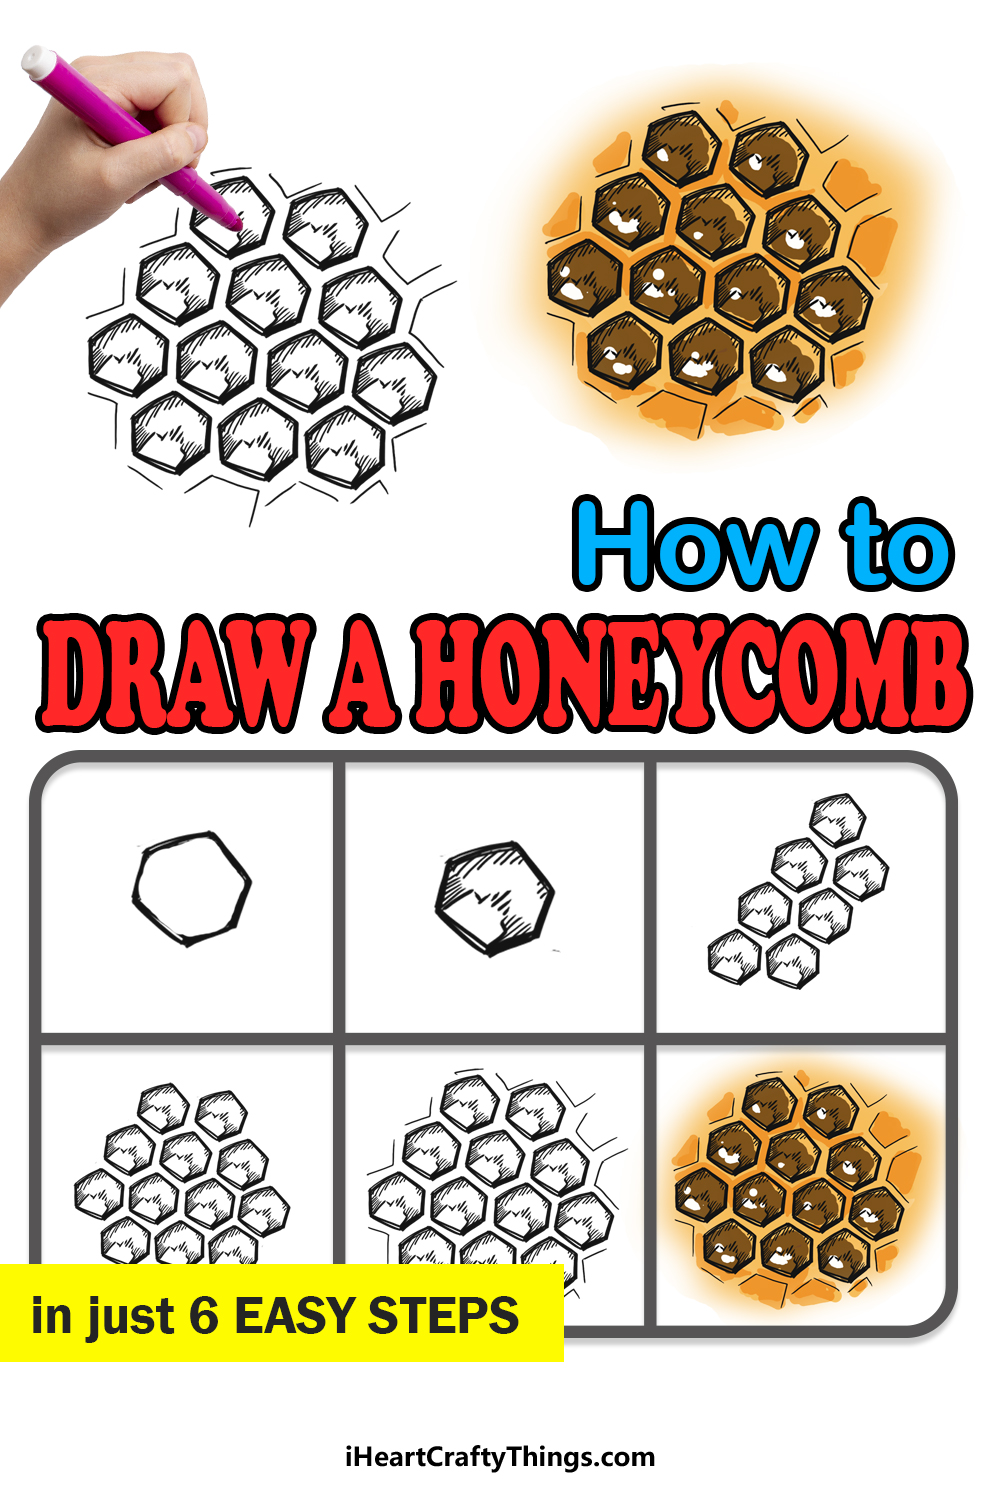 How to Draw A Honeycomb step by step guide